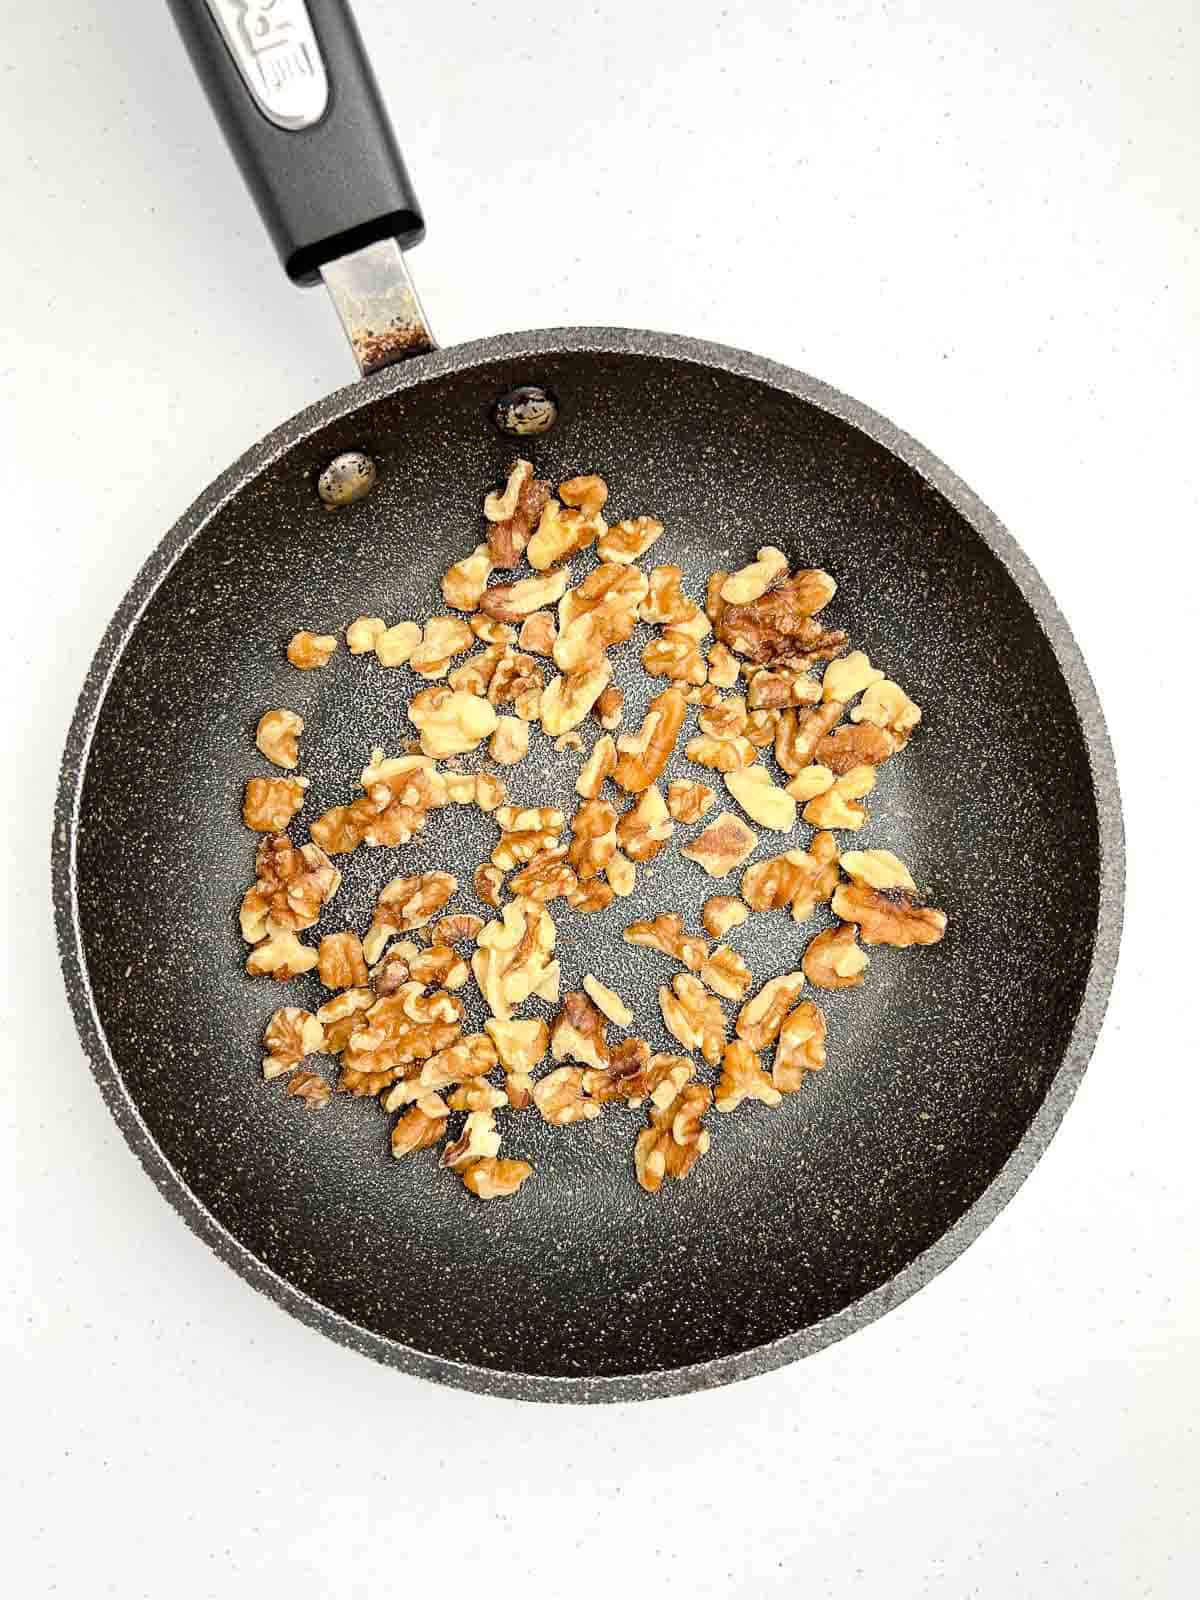 Walnuts toasting in a small skillet.